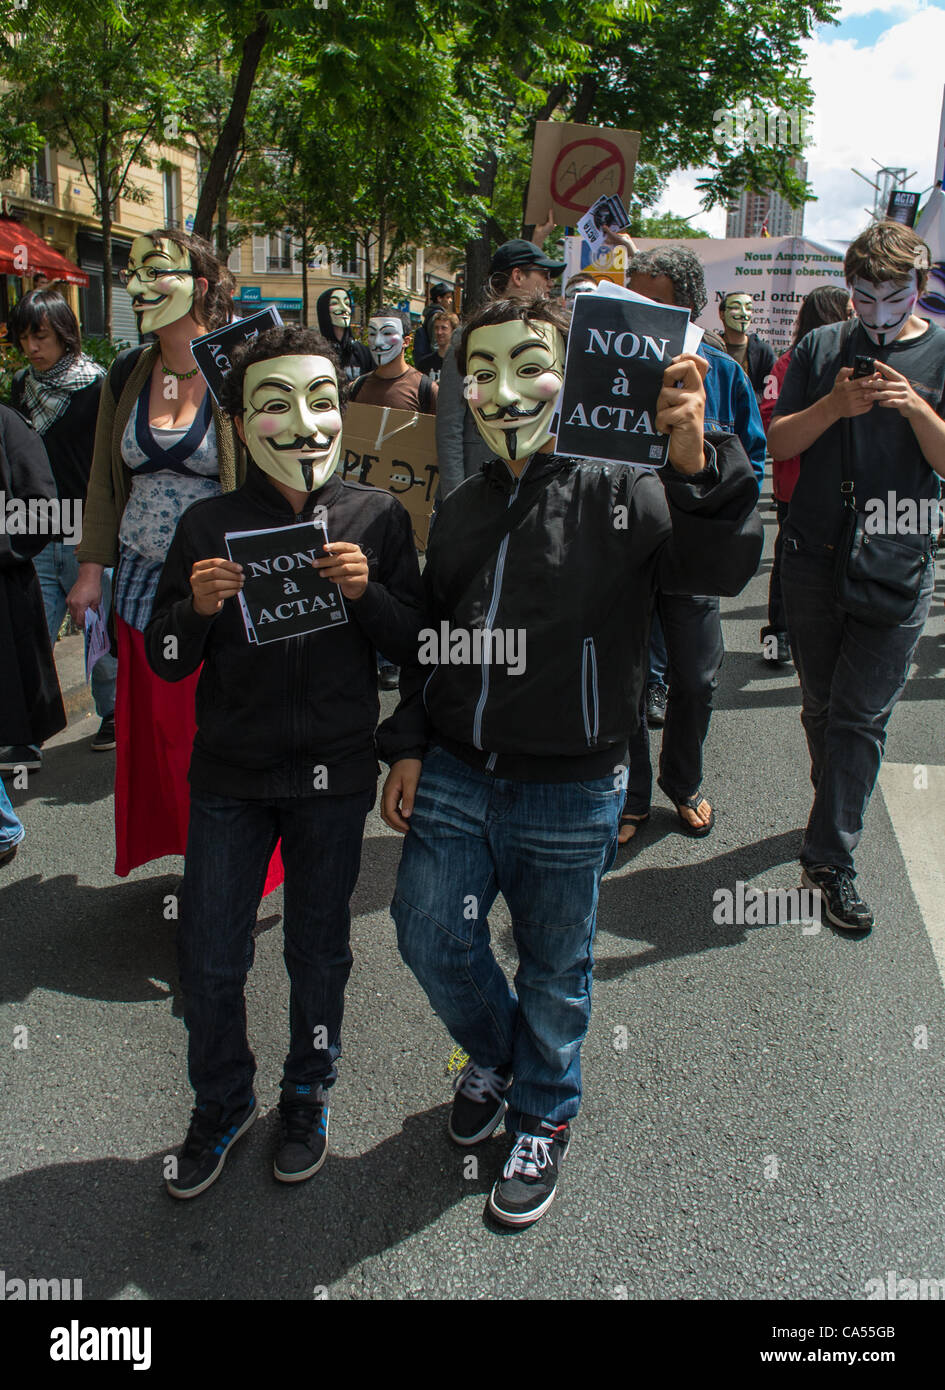 Activists from an Anti- ACTA Internet Accords Law, who oppose communications and censorship of internet networks, Holding Protest signs, and wearing Masks, at a Demonstration in Paris, France, Stock Photo